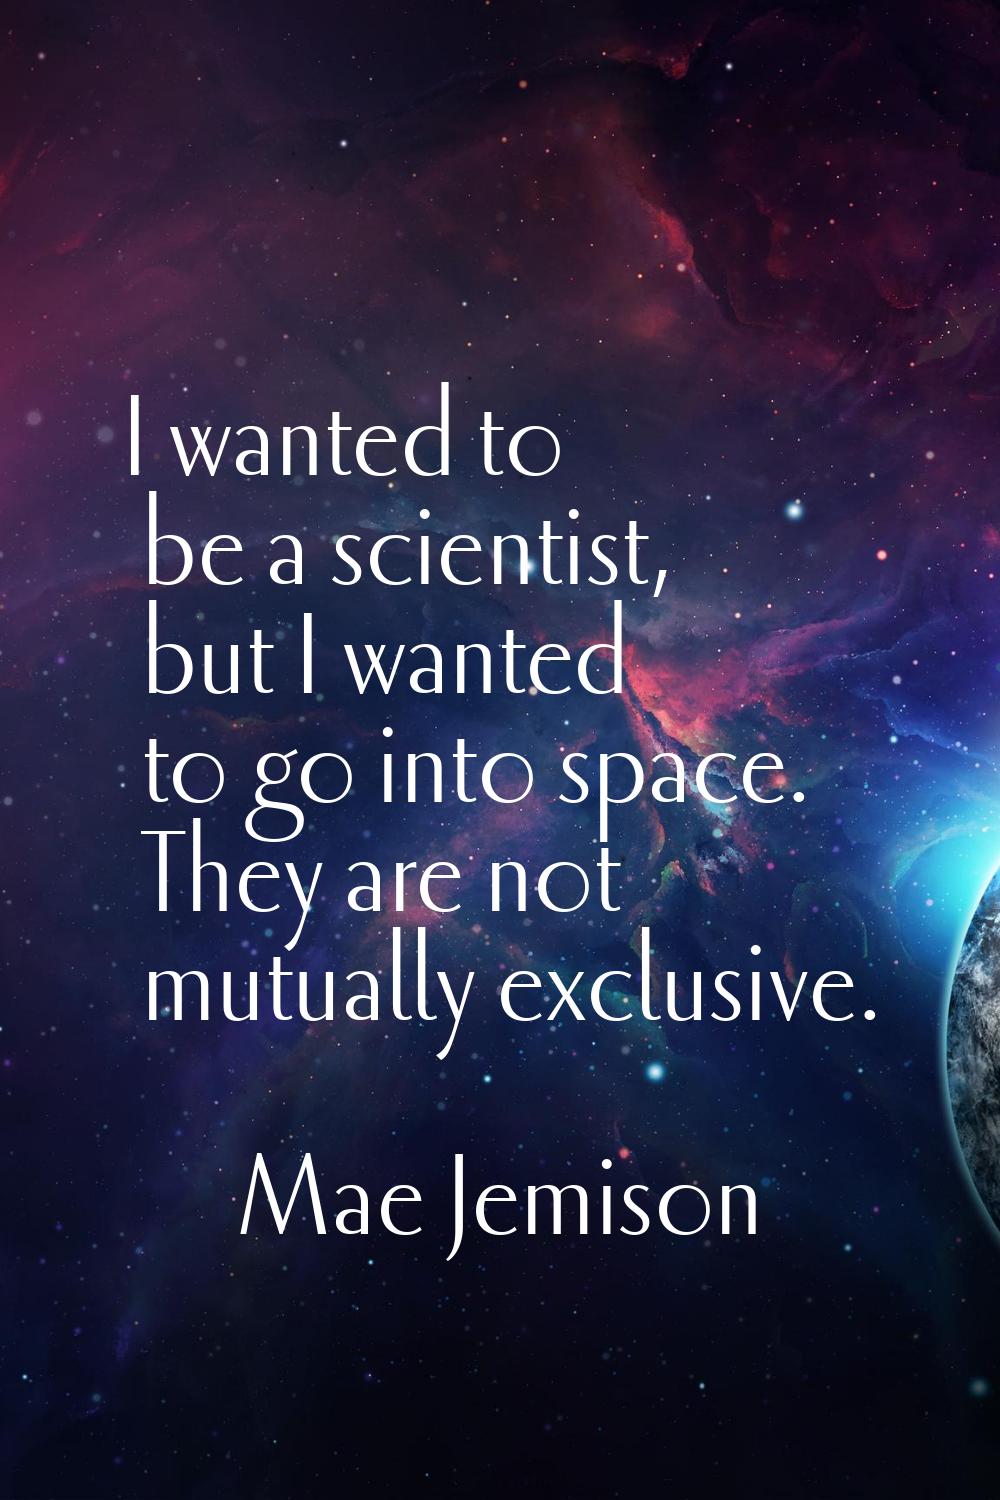 I wanted to be a scientist, but I wanted to go into space. They are not mutually exclusive.